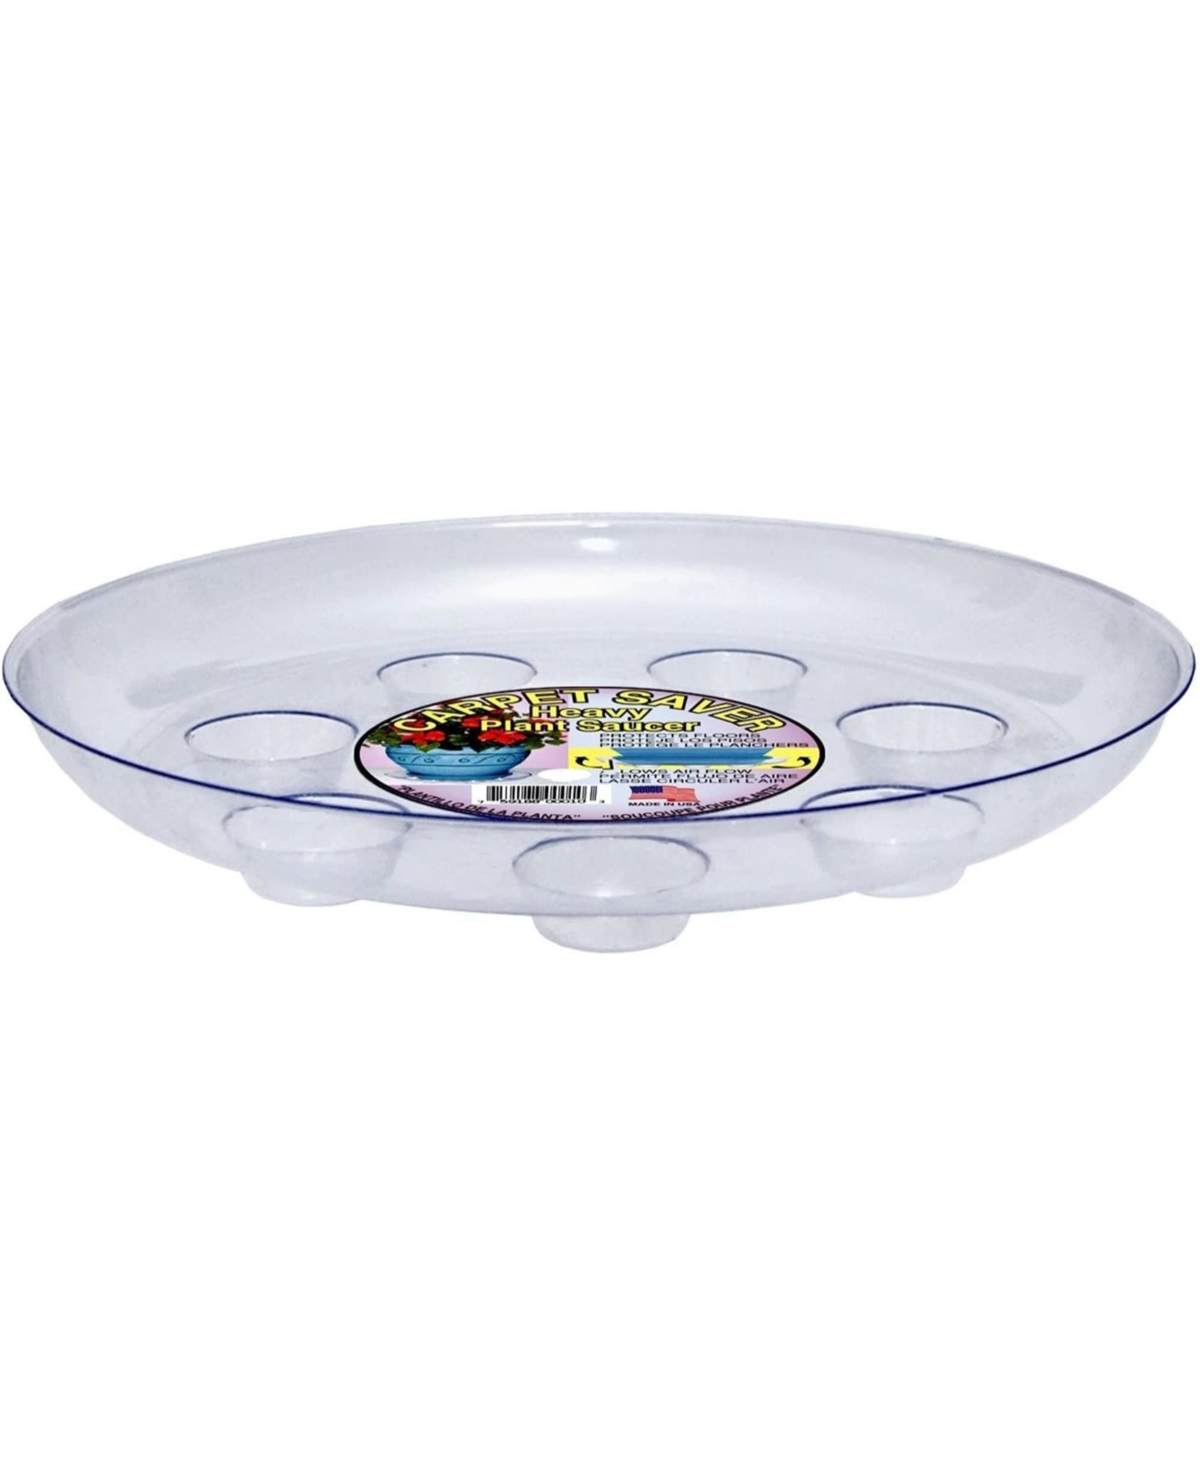 Ds-1400 Heavy Gauge Footed Carpet Saver Saucer, 14-Inch, Clear - Clear